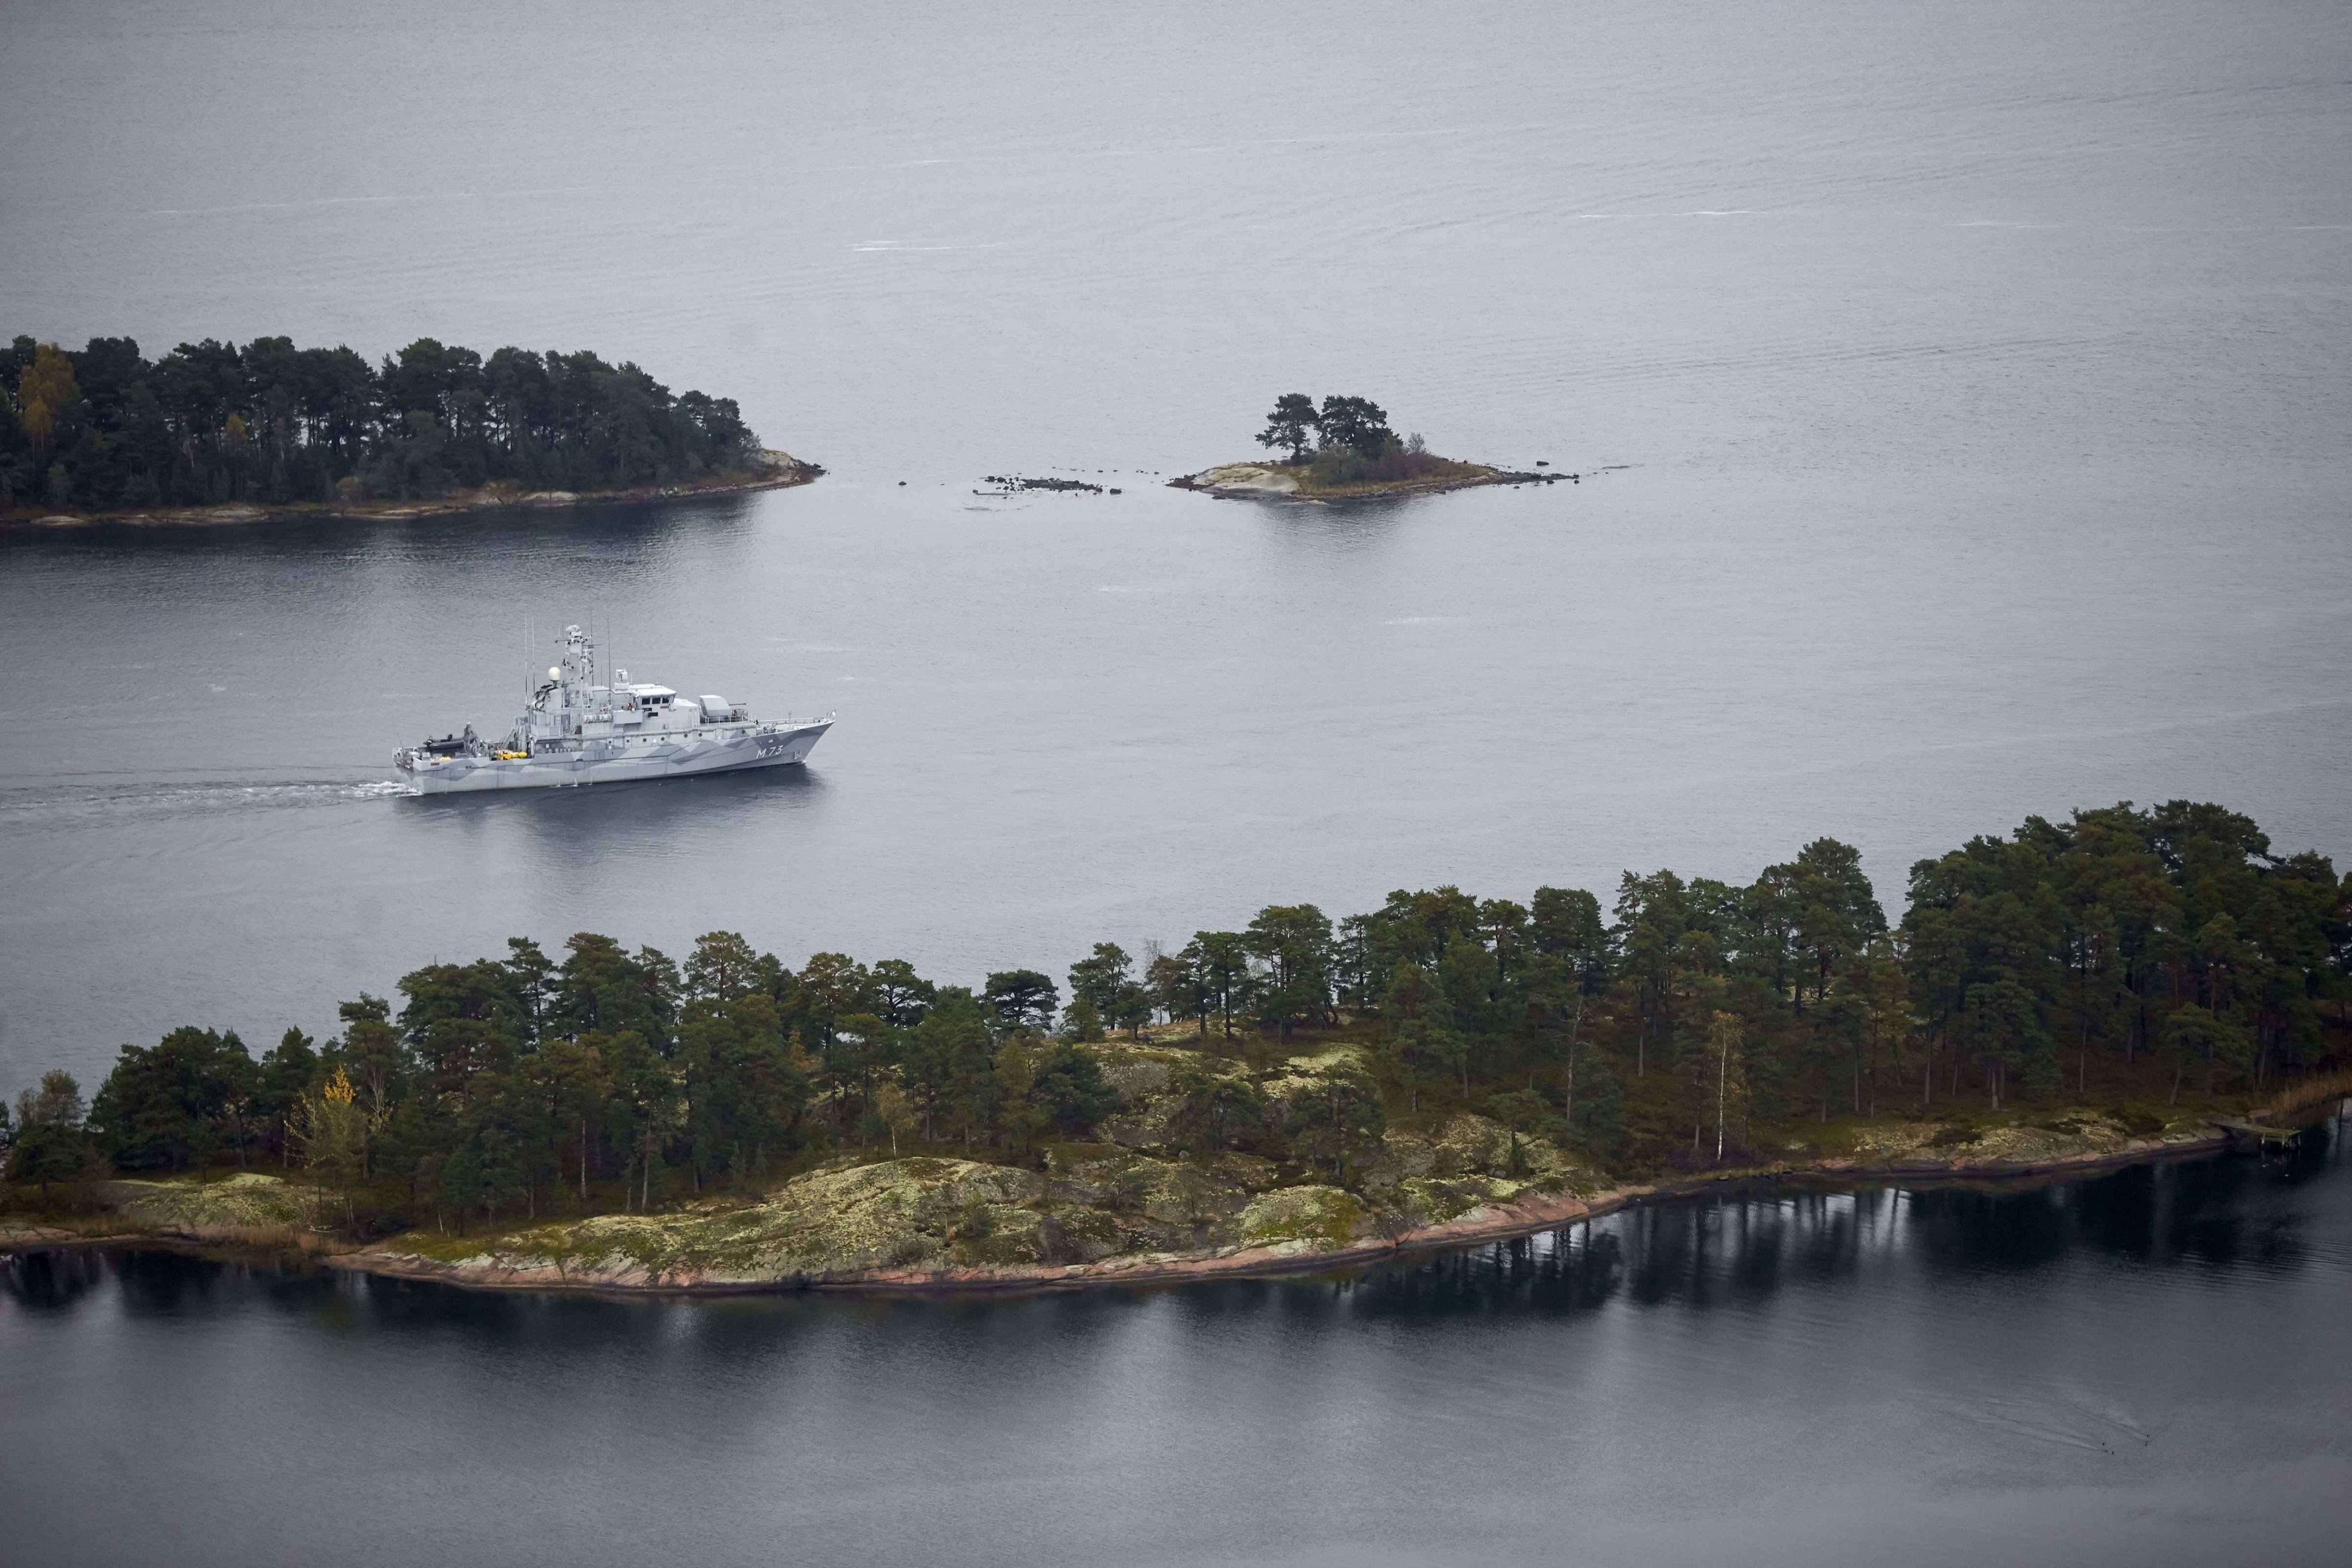 Swedish minesweeper HMS Koster searching for what the military says is a foreign threat in the waters in the Stockholm Archipelago, Sweden, on Oct. 19 2014.